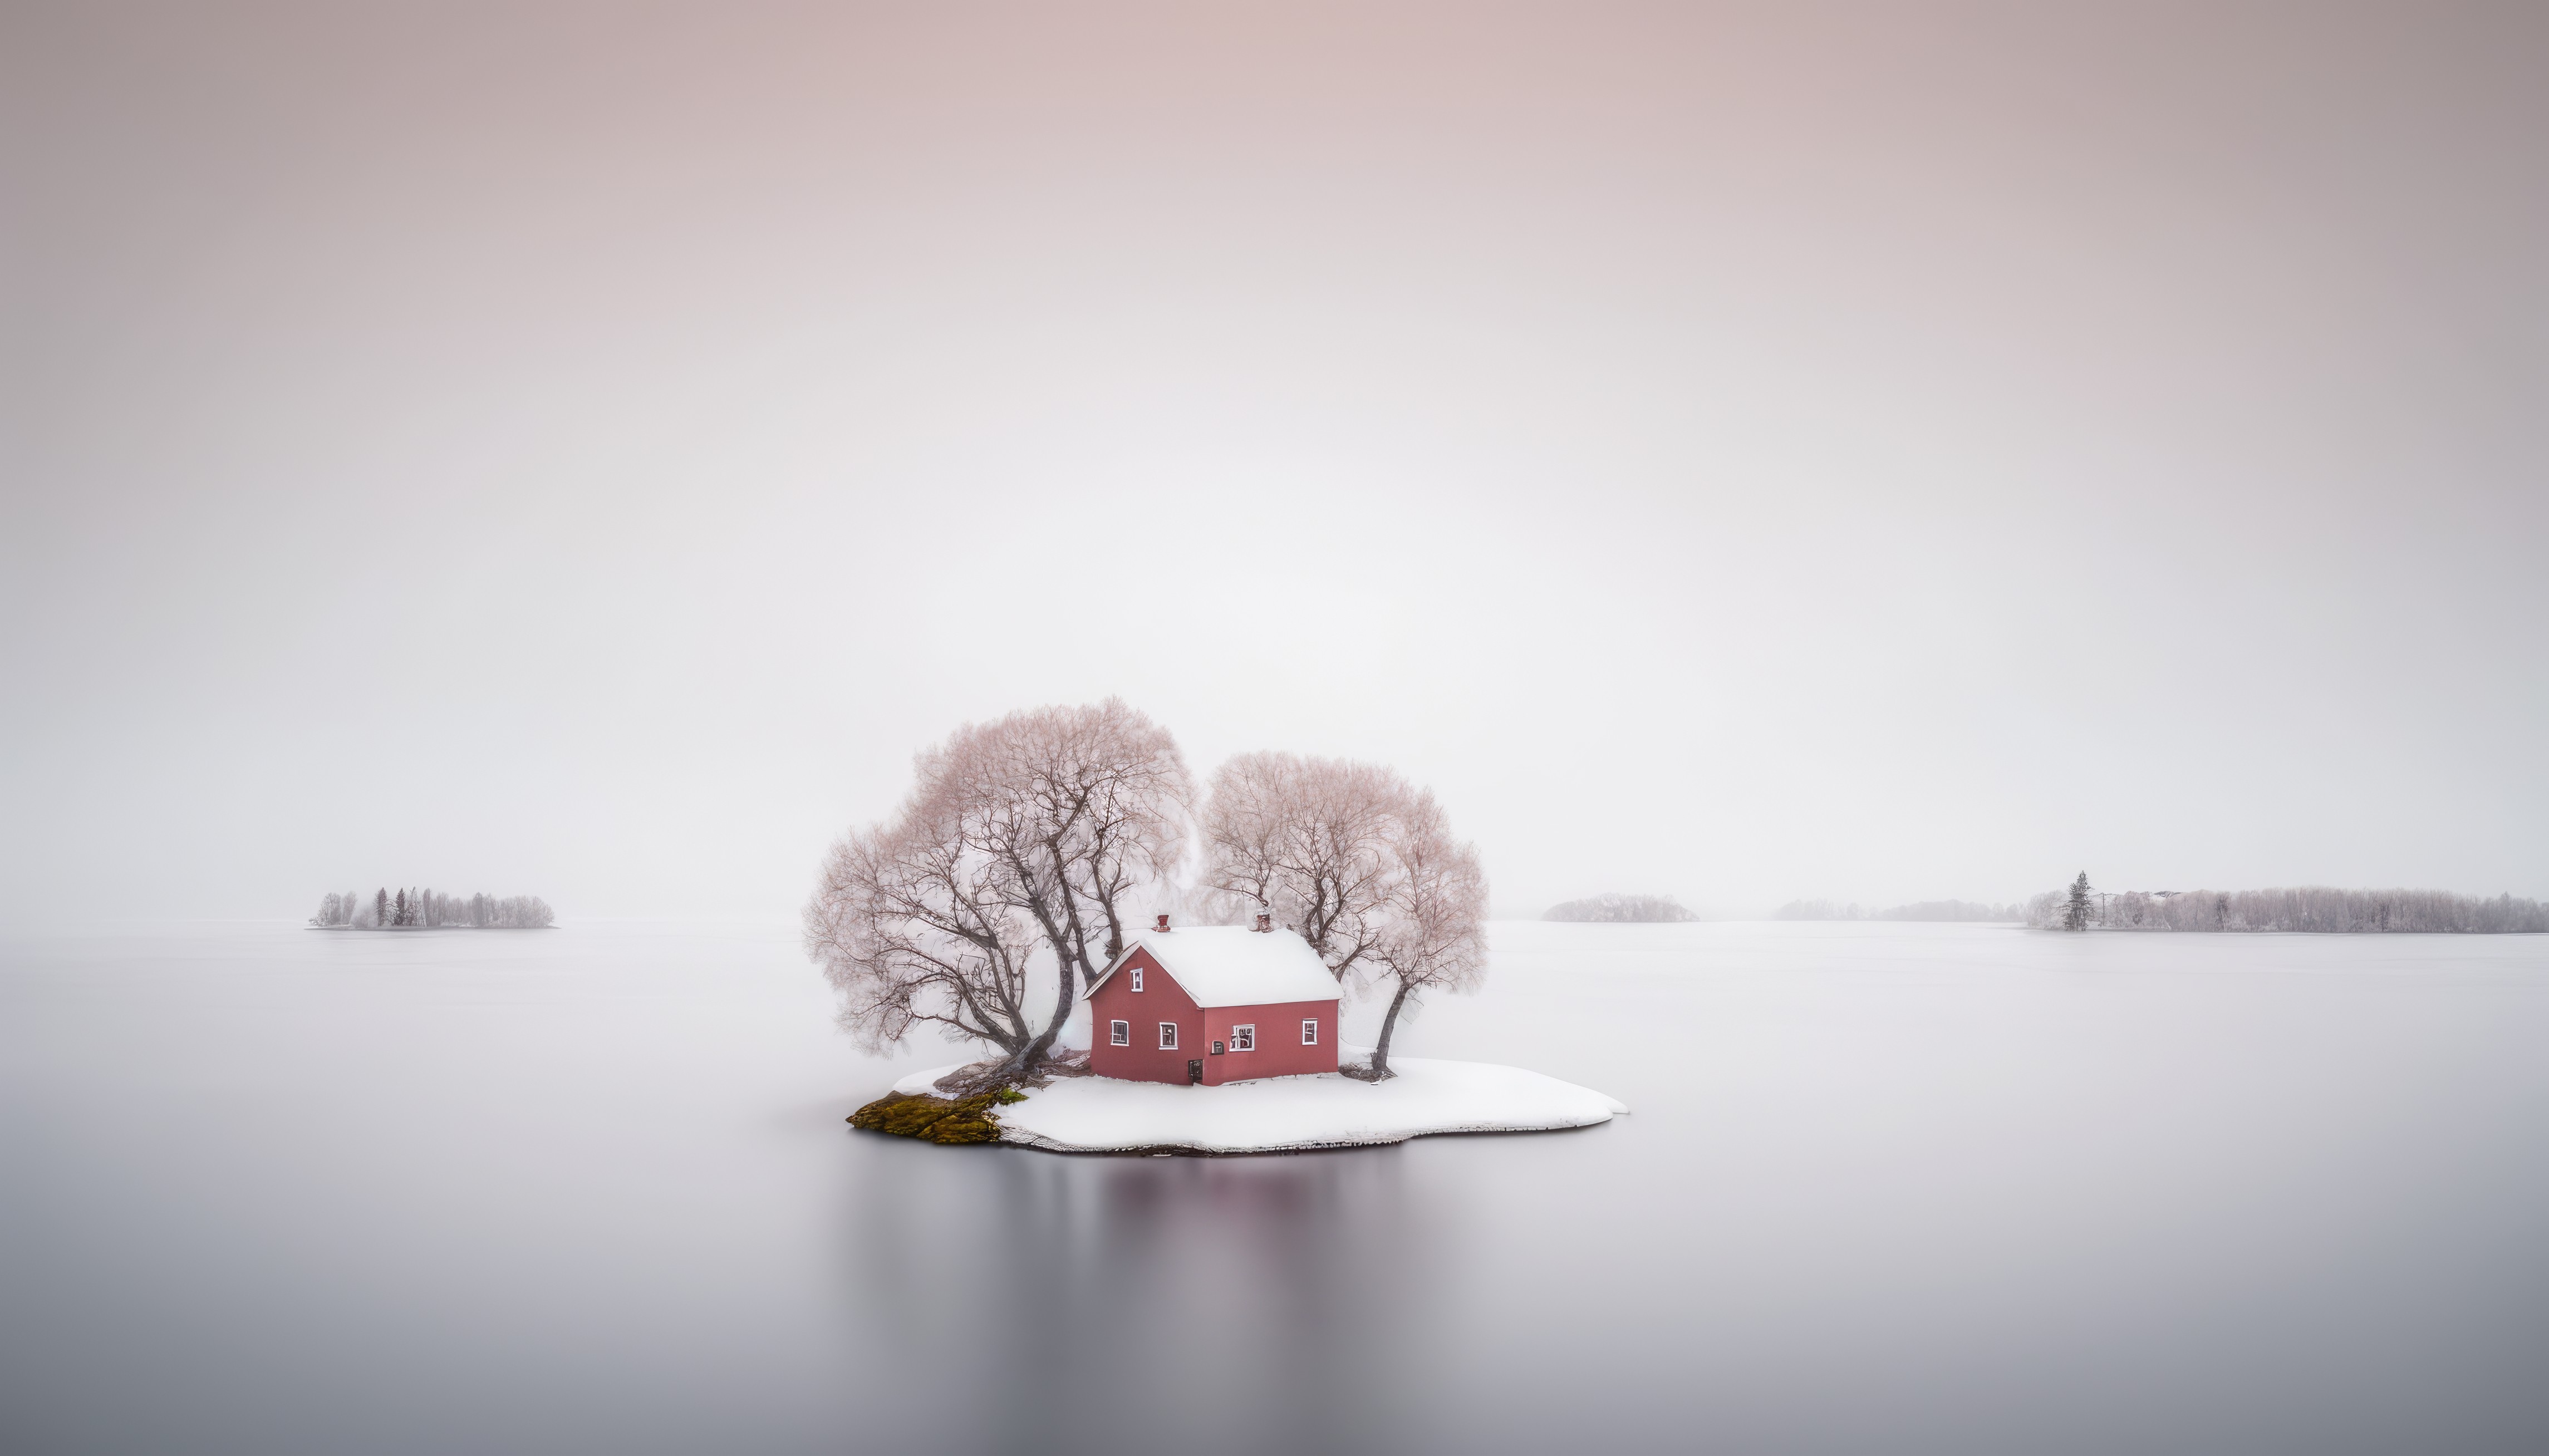 General 4579x2616 AI art cottage island Sweden lake white simple background minimalism snow trees house water